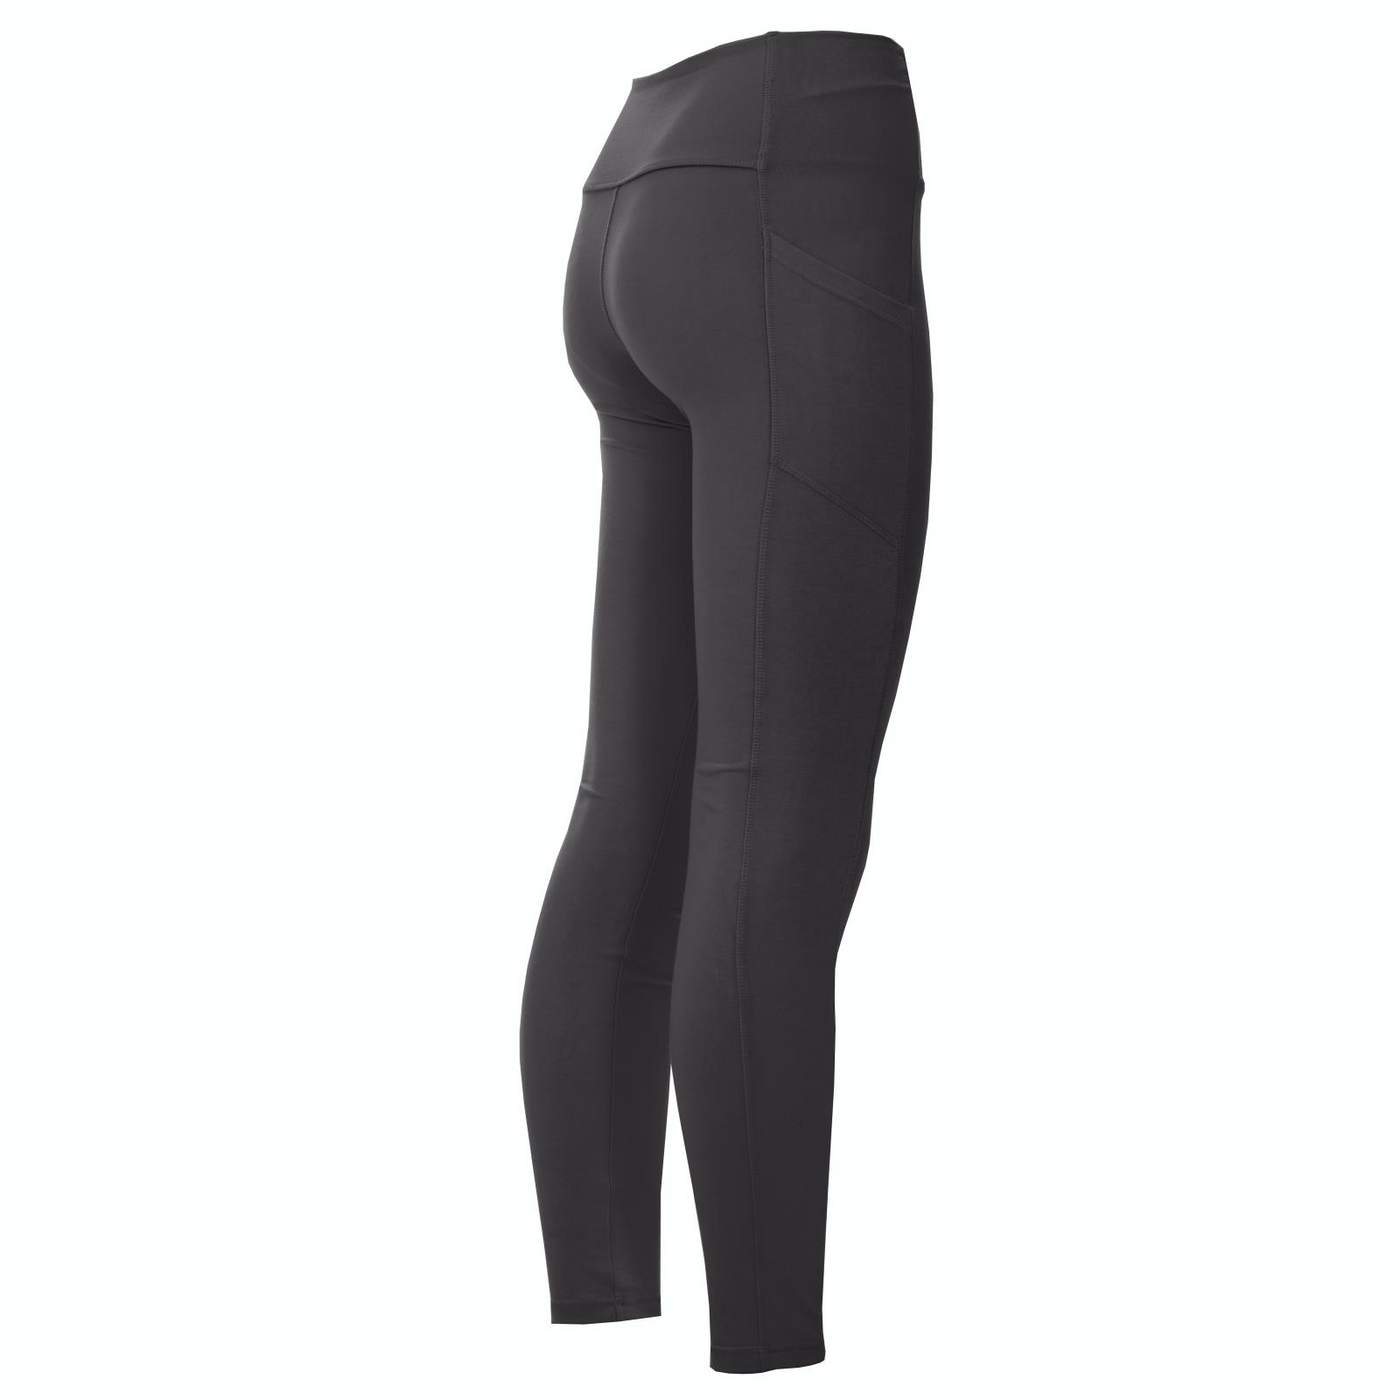 Kickee Pants Women's Luxe Stretch Leggings with Pockets: Solid Midnight (Full Length)